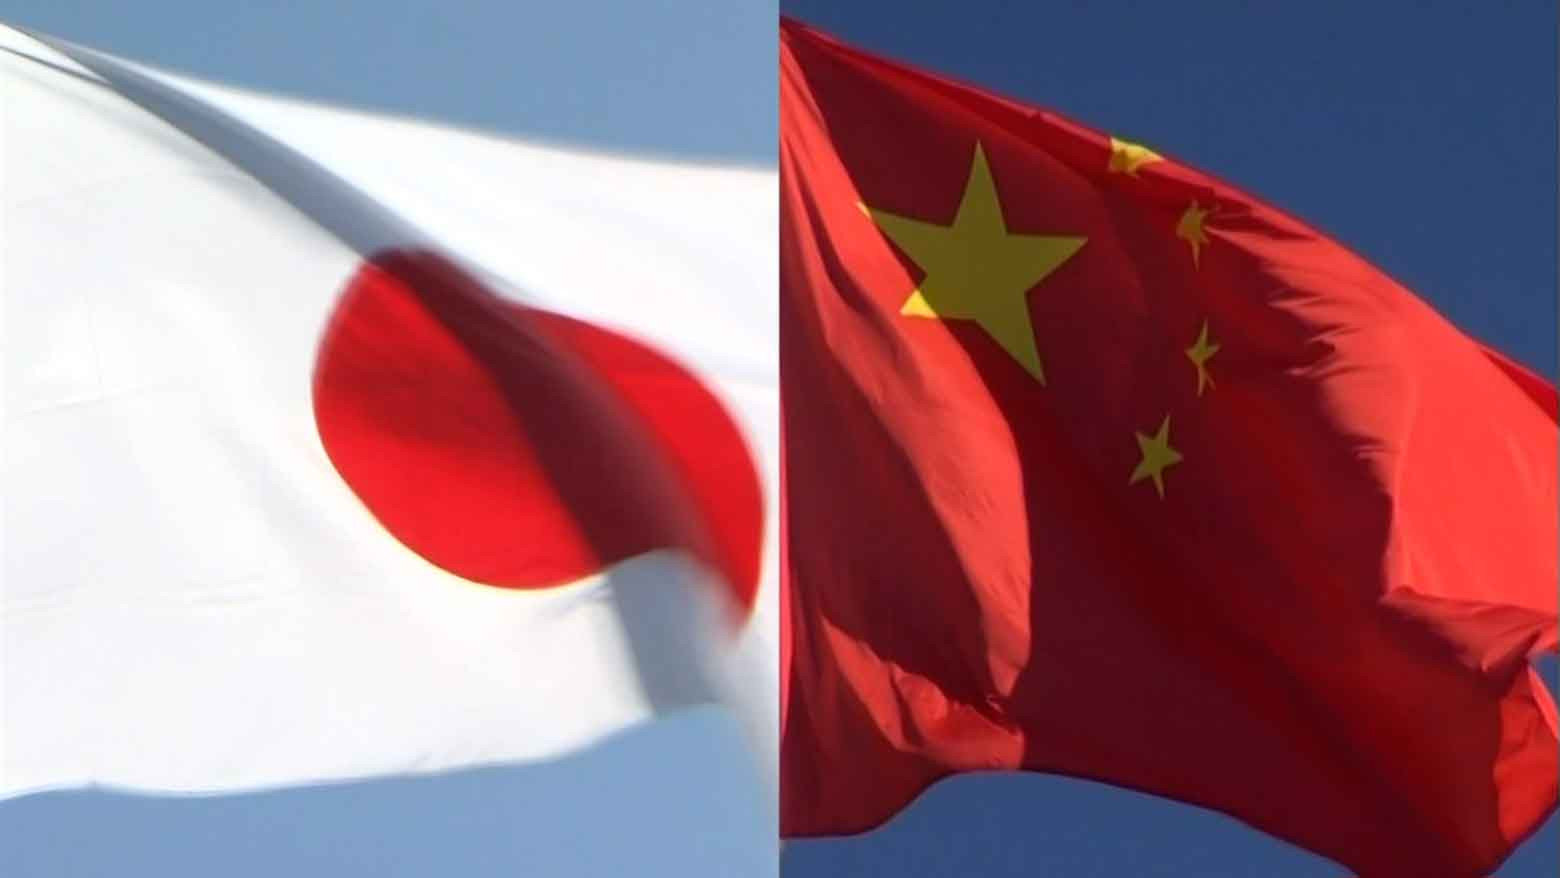 Analysis: China reaches out to Japan to mark diplomatic milestone